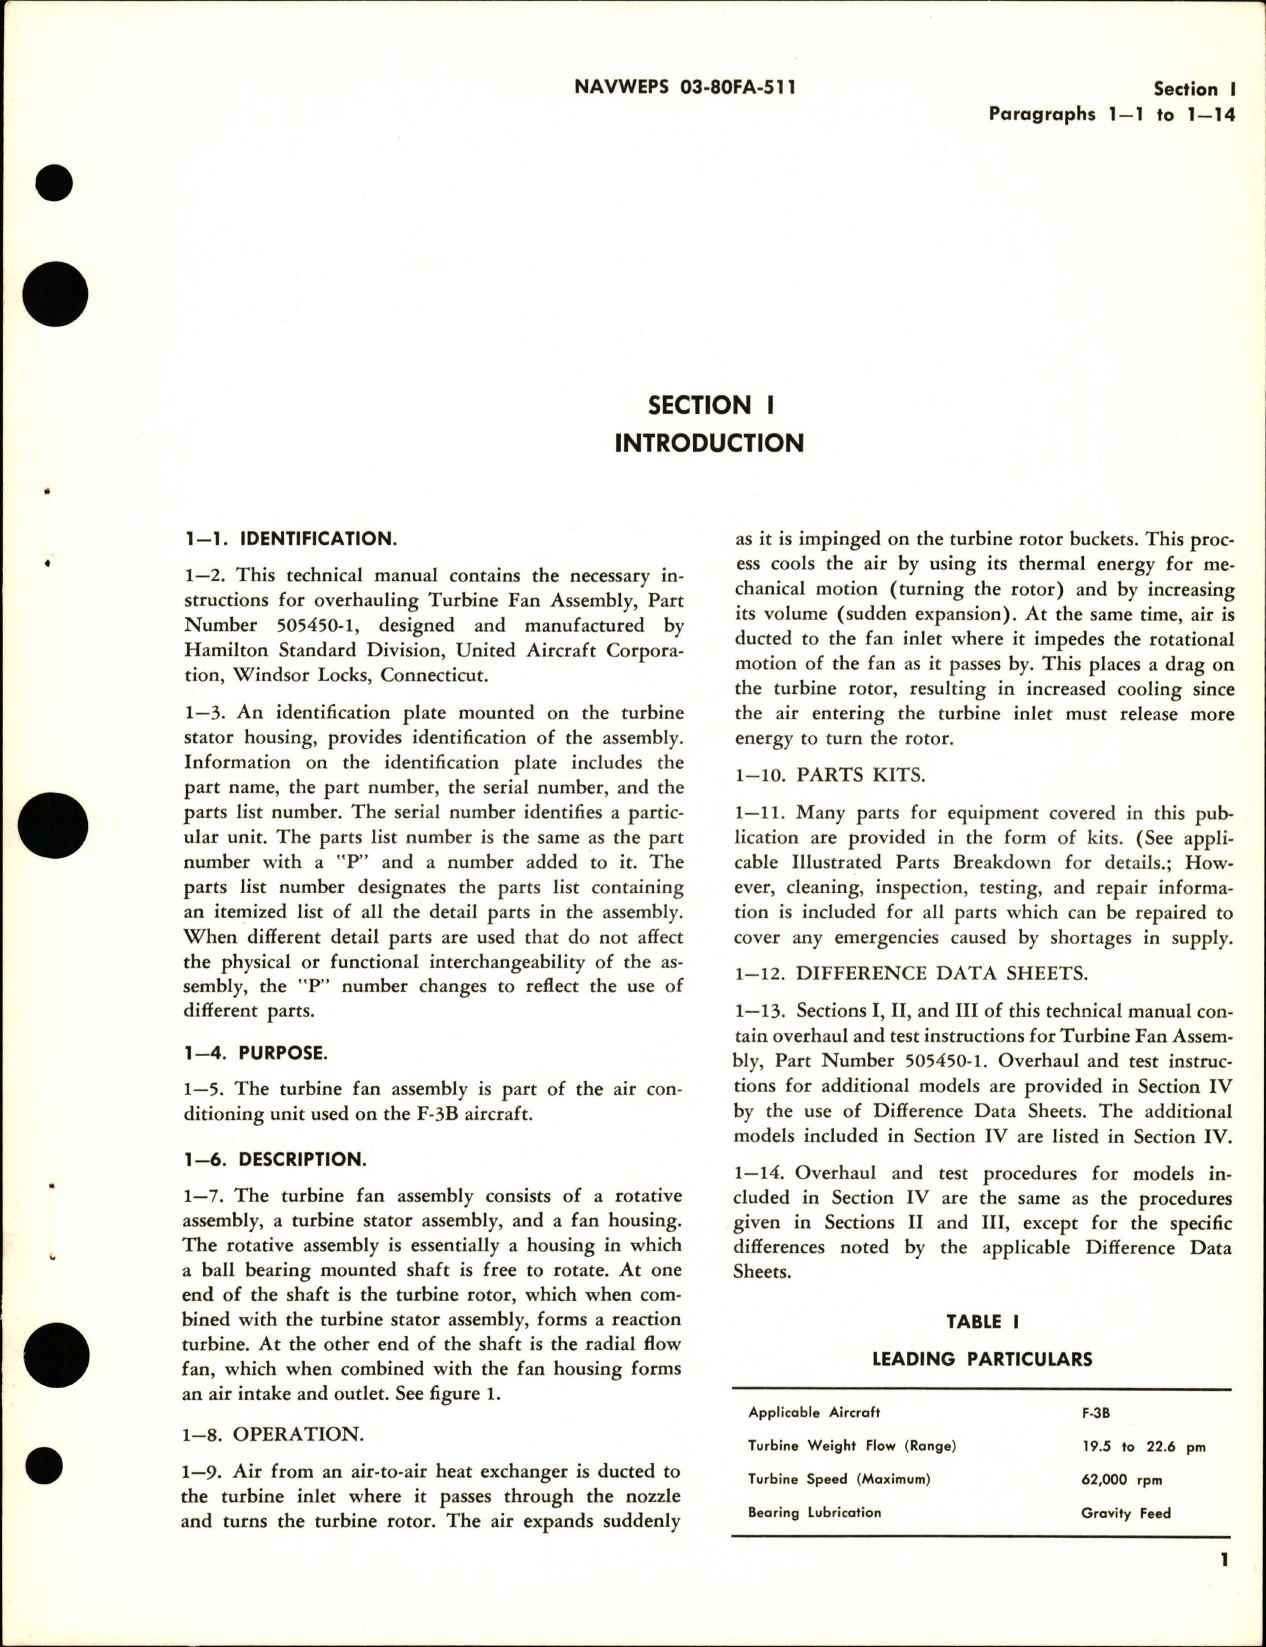 Sample page 5 from AirCorps Library document: Overhaul Instructions for Turbine Fan Assembly - Parts 505450-1 and 505450 